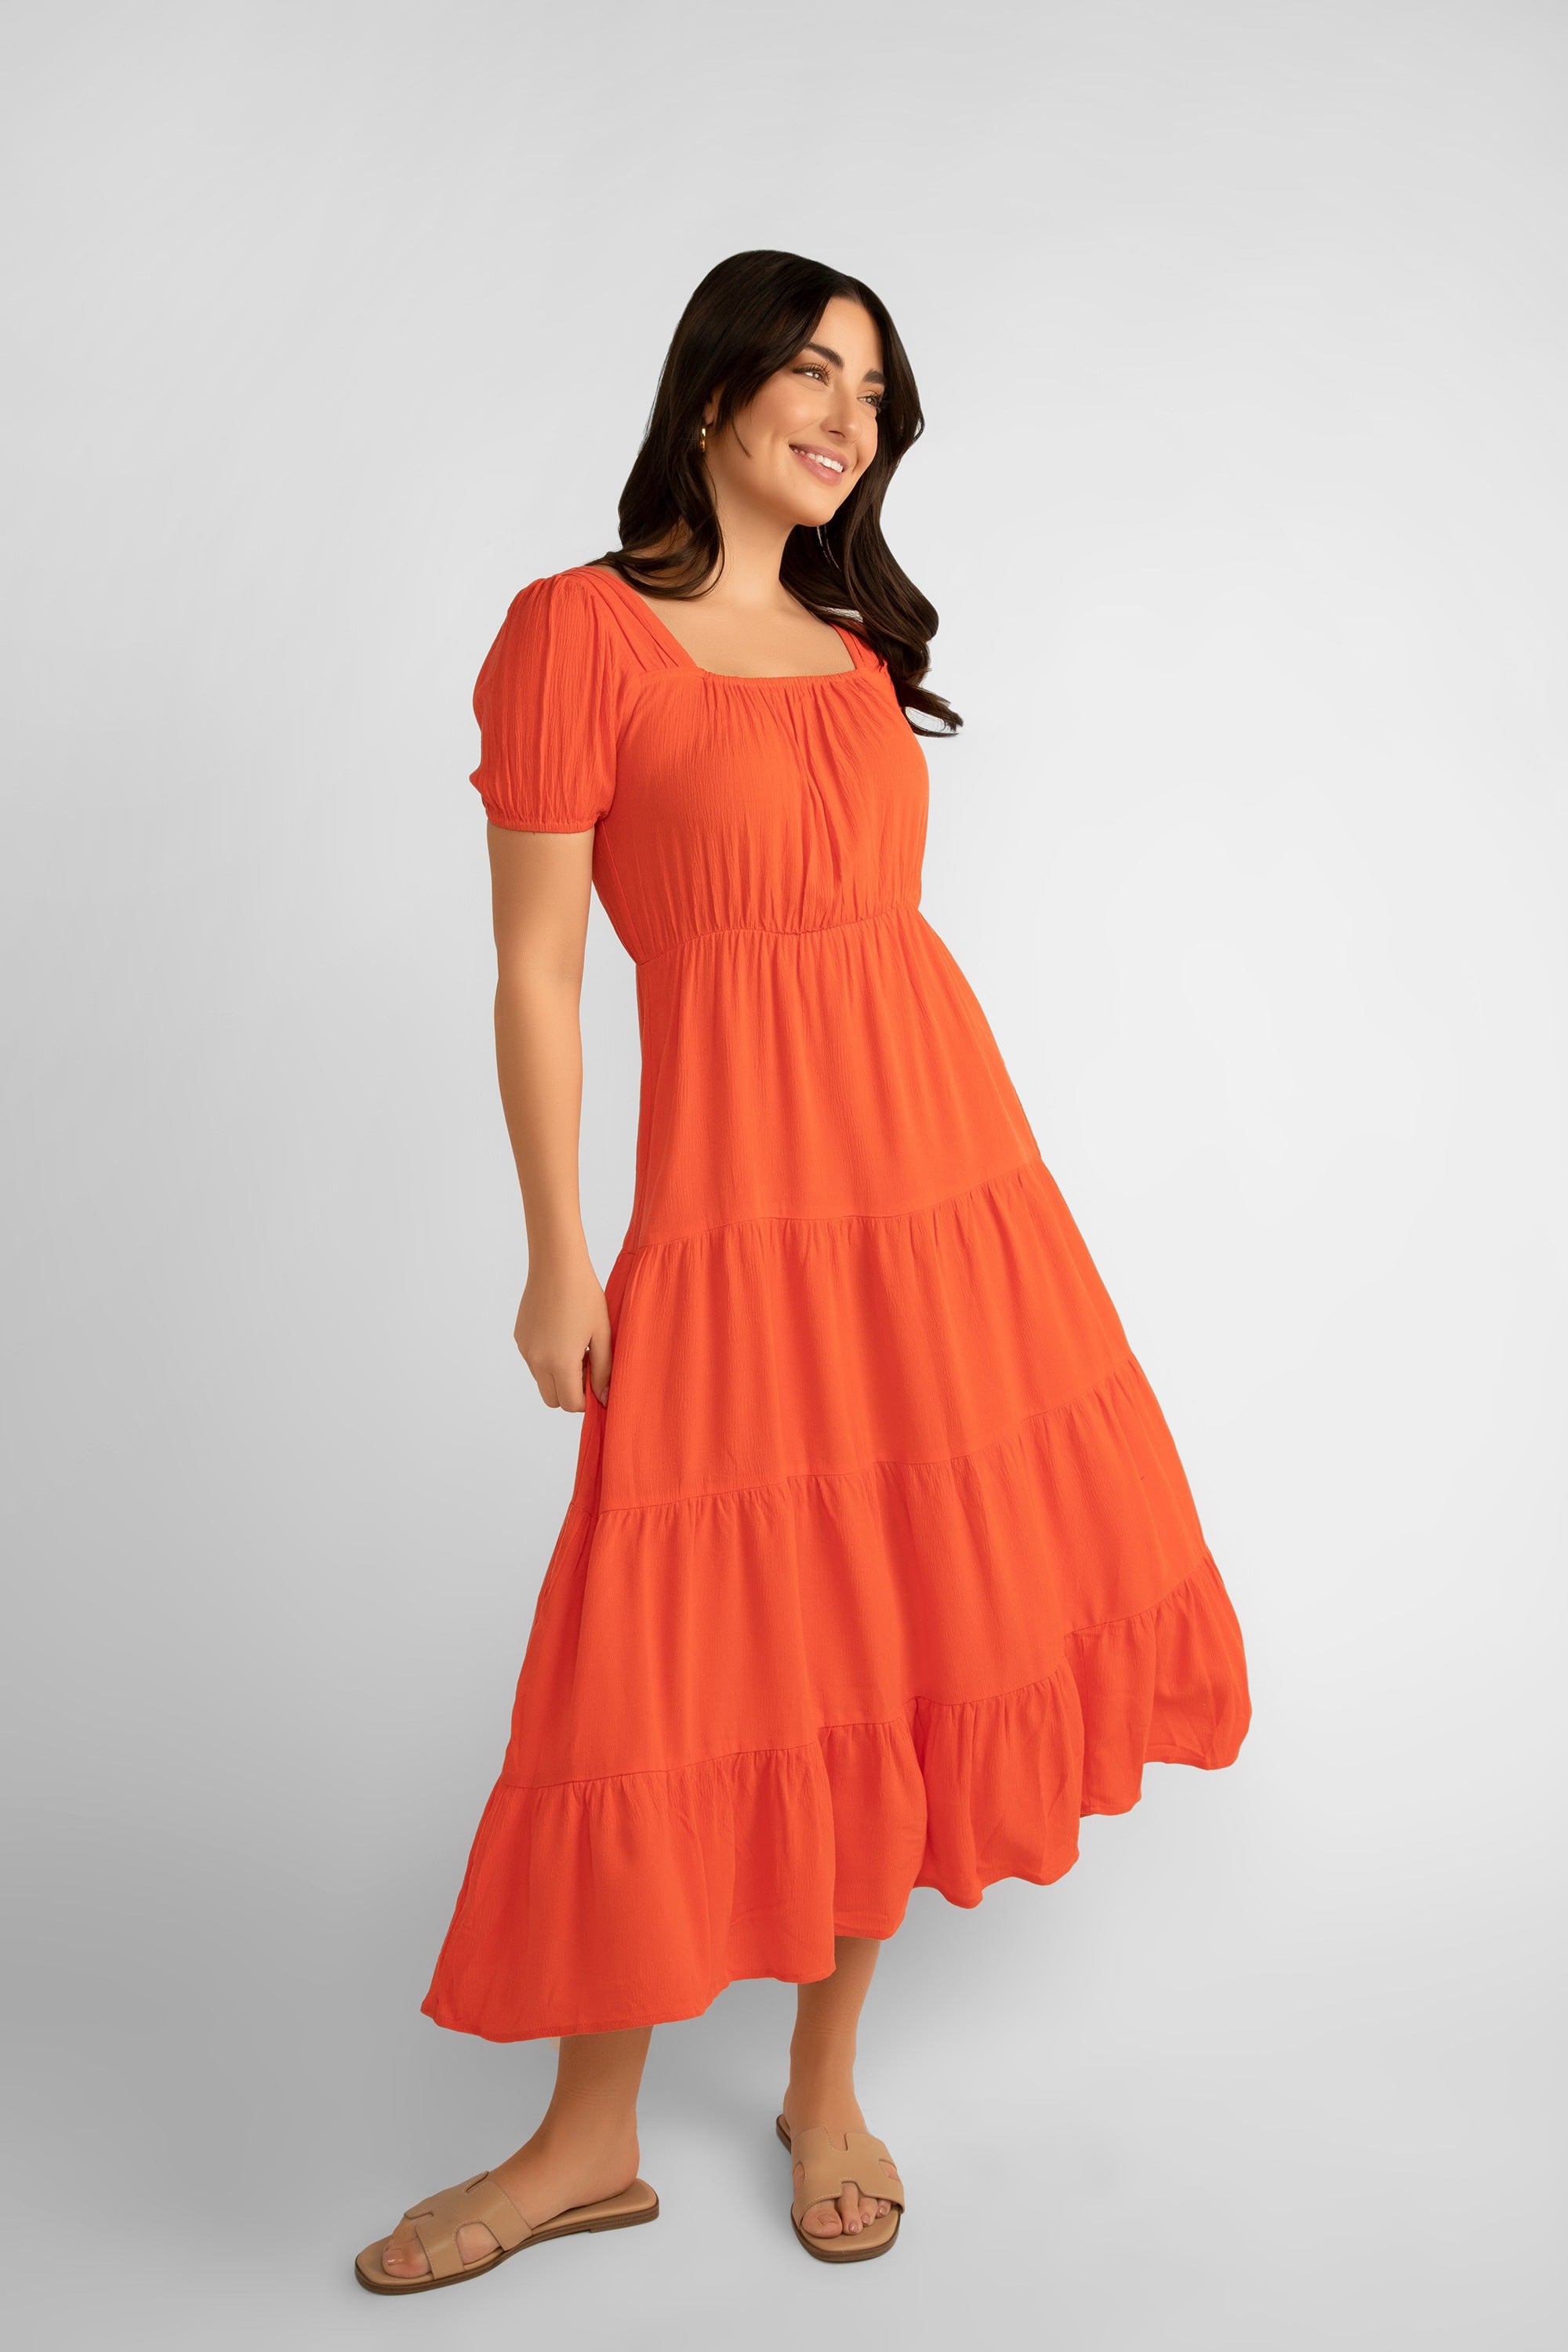 Pink Martini (DR-230524) Women's Square Neck, Short Puff Sleeve Tiered Midi Dress in Orange